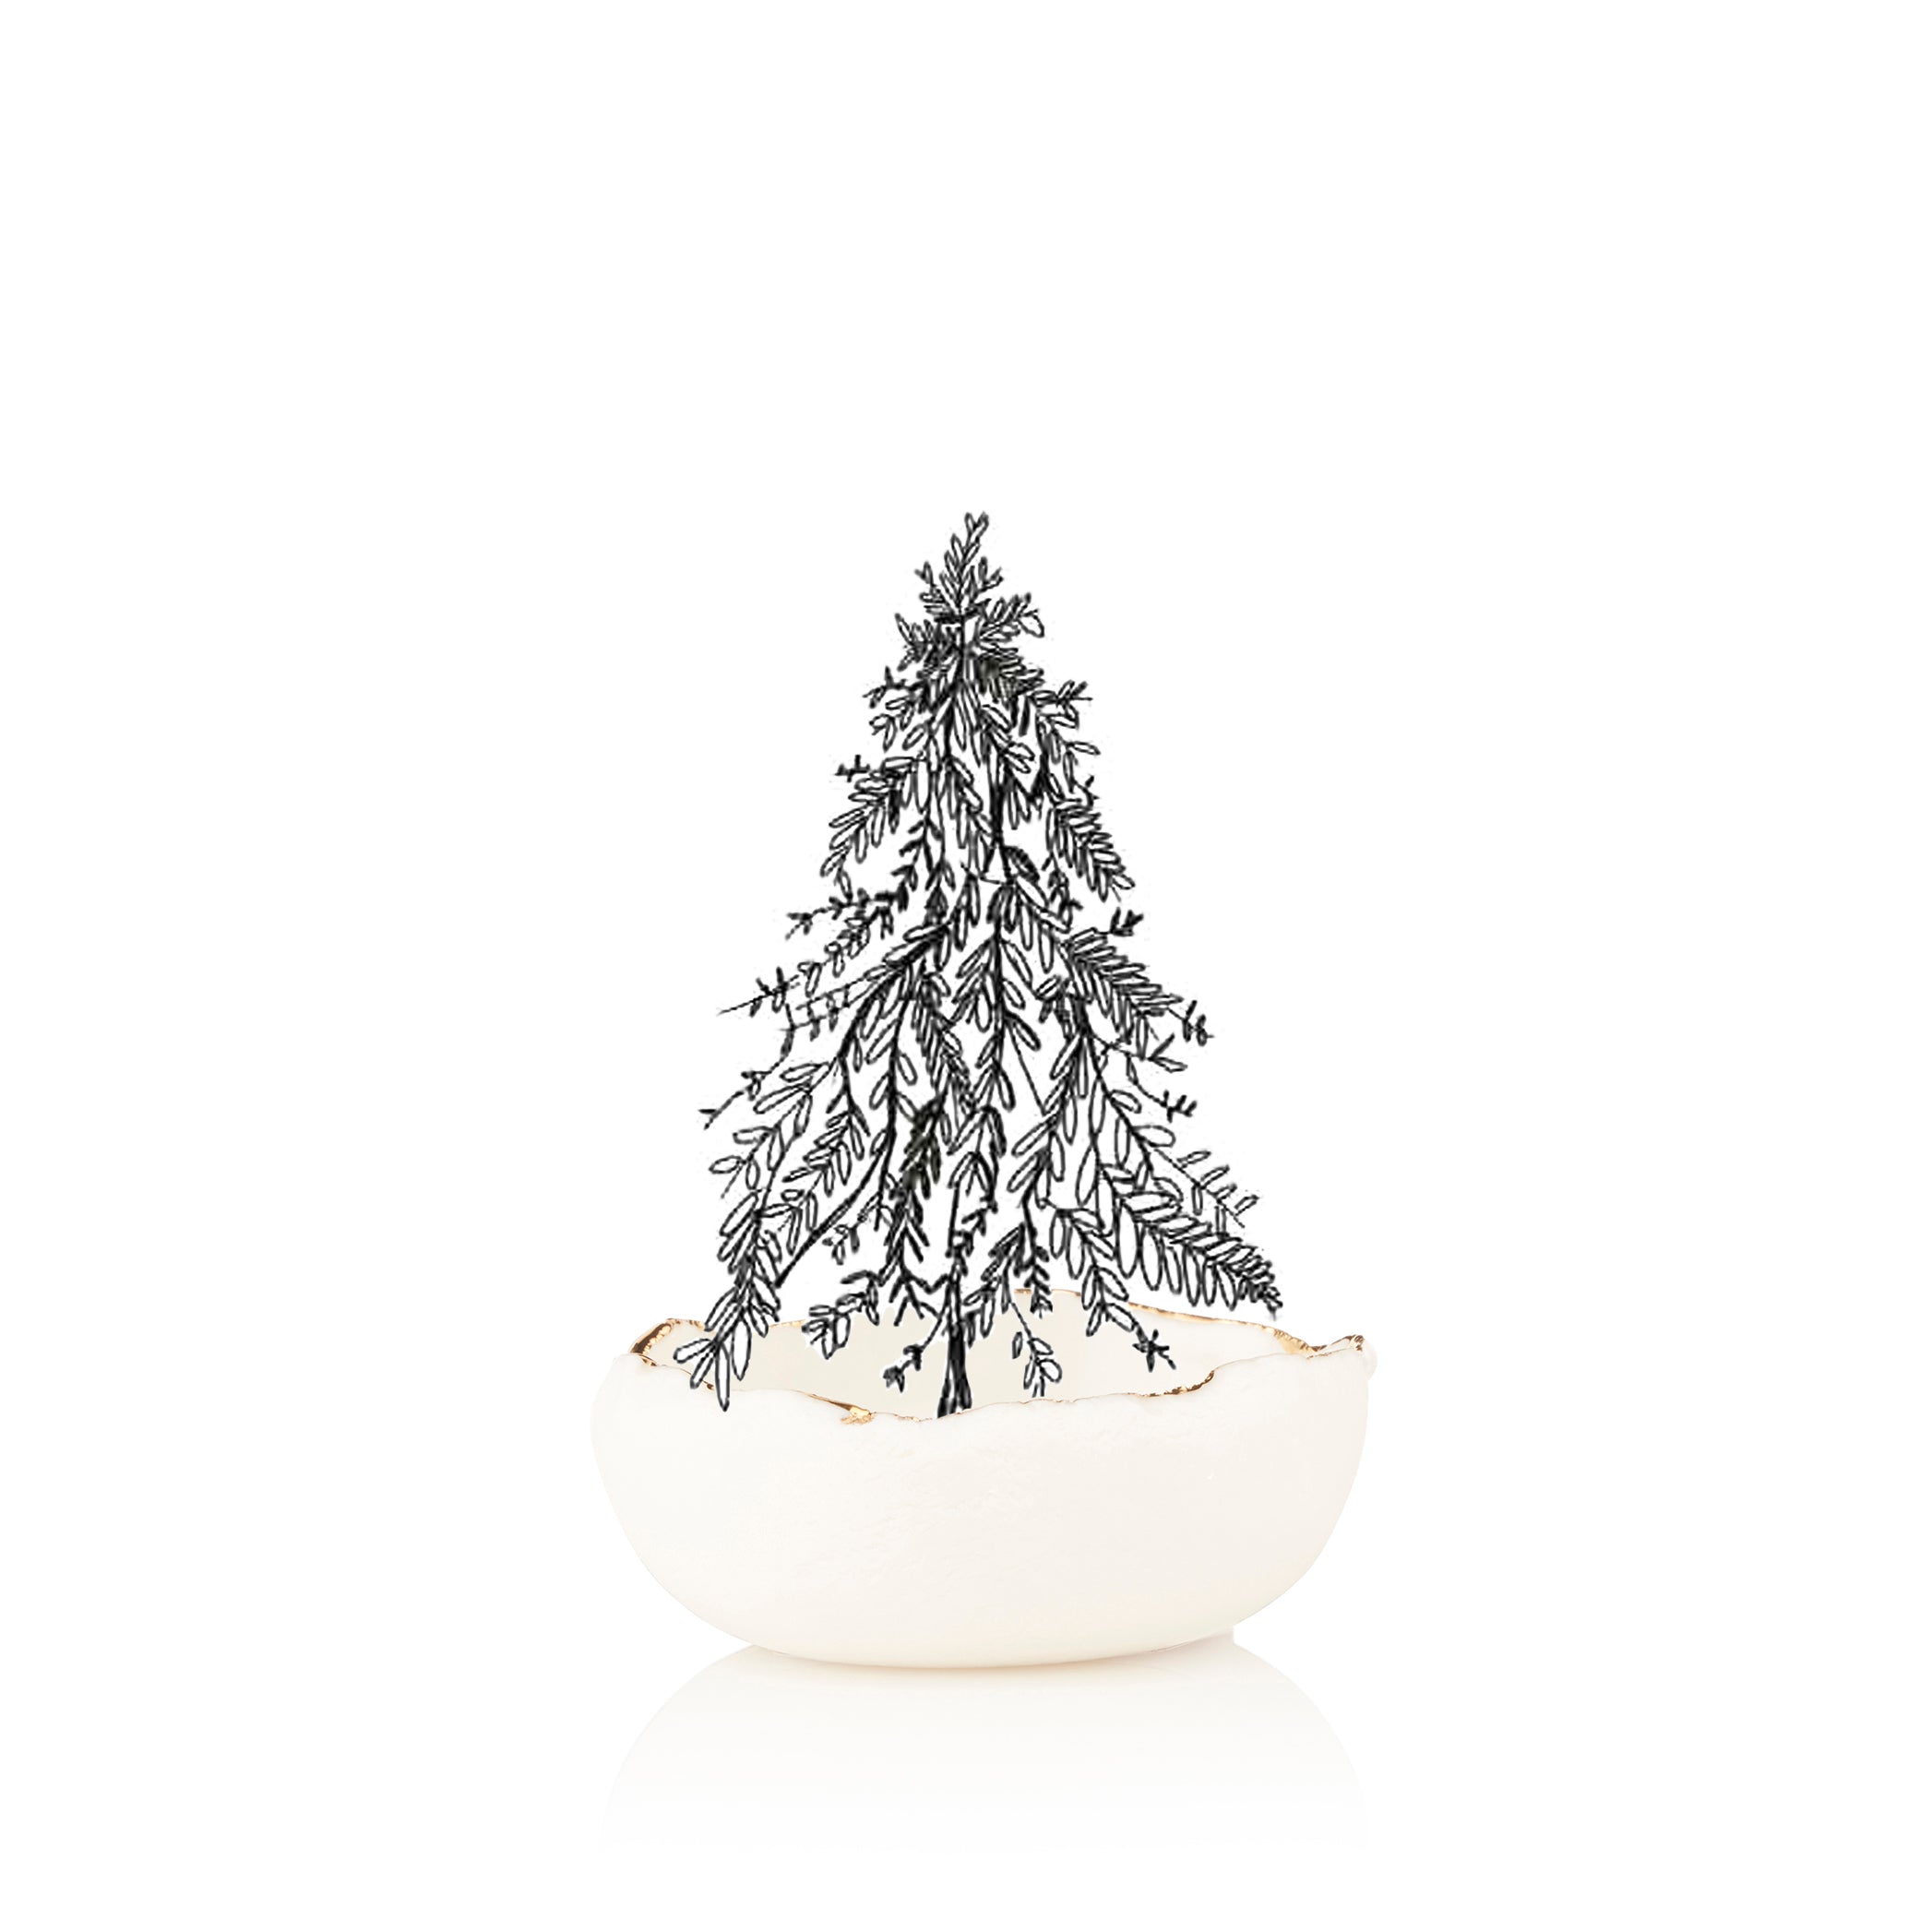 HB Jagged Bowl with Gold Christmas Tree, 7cm